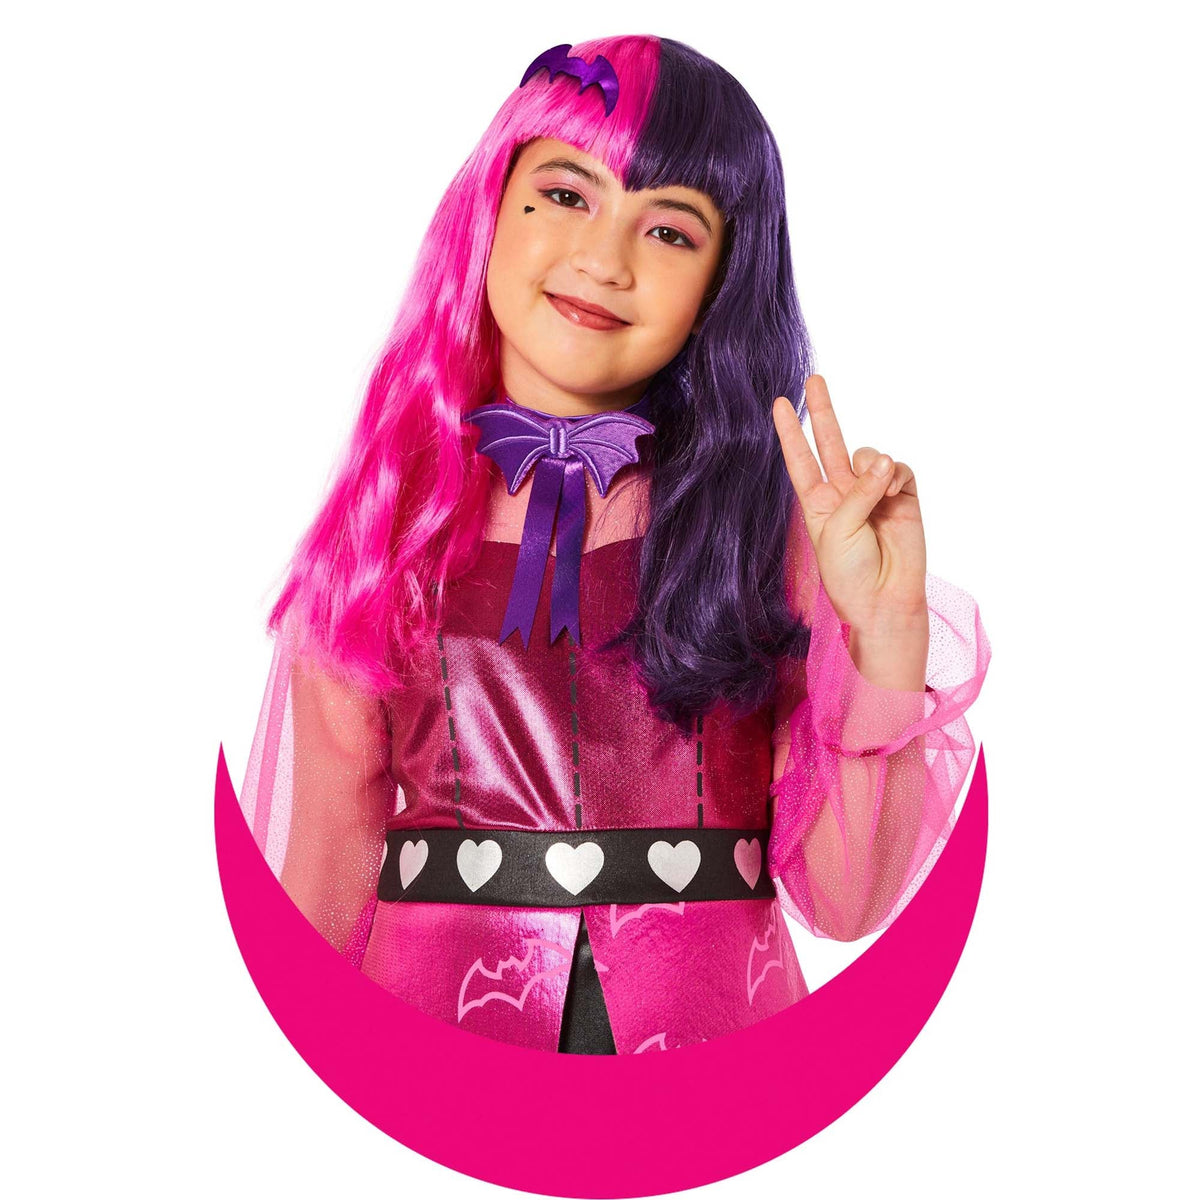 IN SPIRIT DESIGNS Costumes Accessories Monster High Draculaura Wig for Kids, Pink and Purple 810017528158